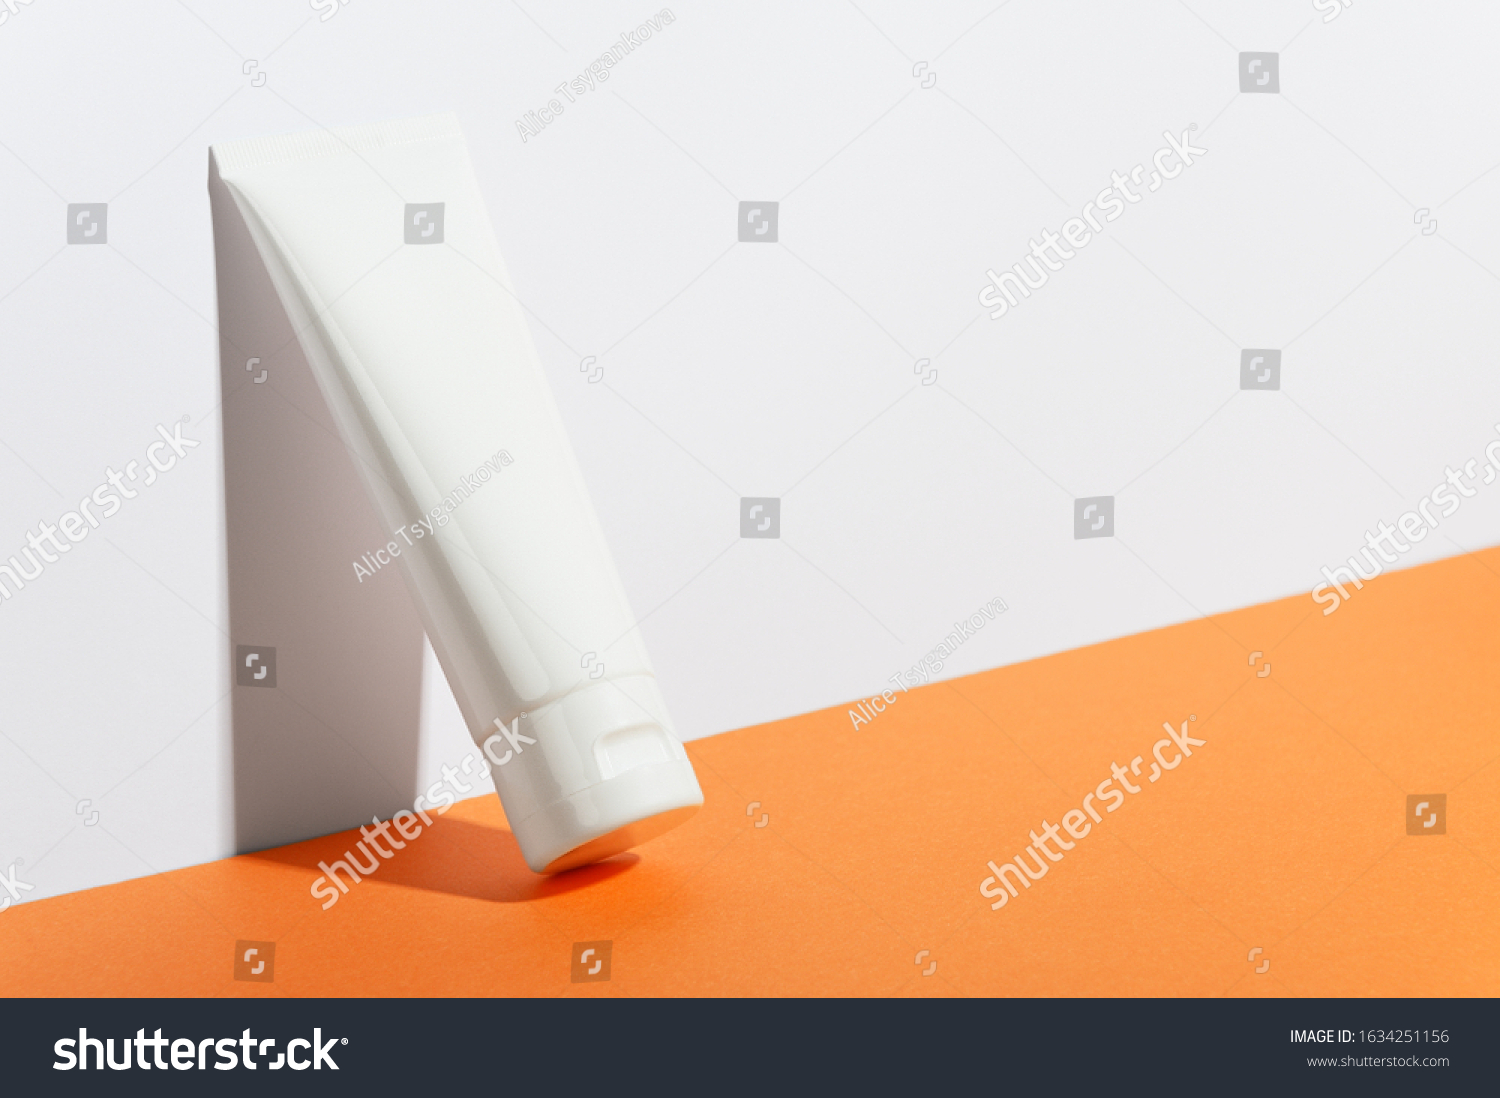 Cream tube on bright sunny orange background. Cosmetic skincare product blank plastic package. White unbranded lotion, balsam, hand creme, toothpaste mockup. Sunscreen cream bottle #1634251156